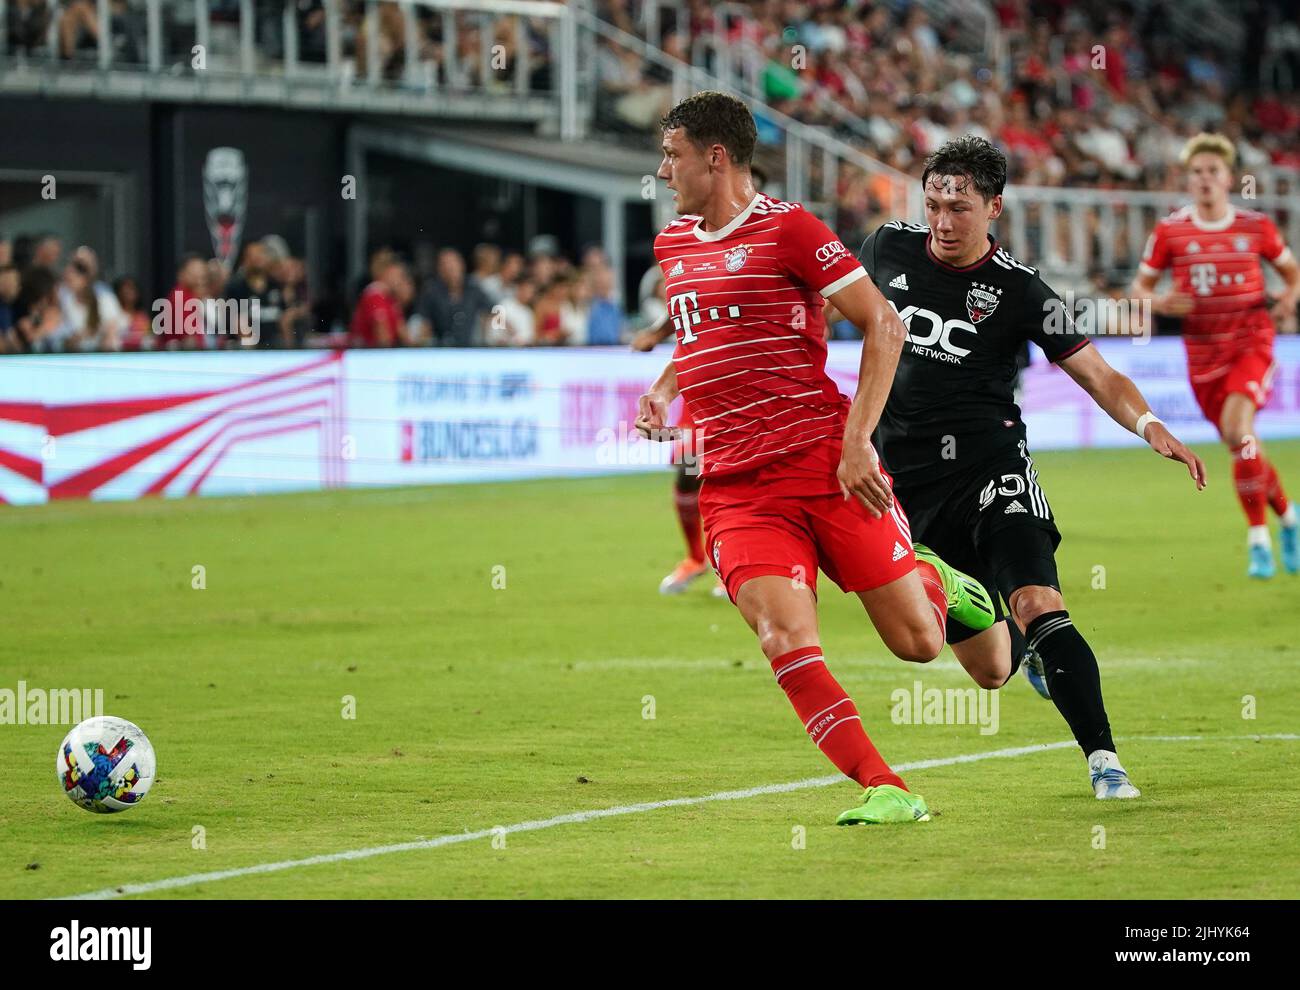 WASHINGTON, DC - JULY 20:  Bayern Munich defender Benjamin Pavard (5) moves the ball away from DC United midfielder Theodore Ku-Dipietro (35) during an international friendly match between D.C United and Bayern Munich, on July 20, 2022, at Audi Field, in Washington, DC. Stock Photo